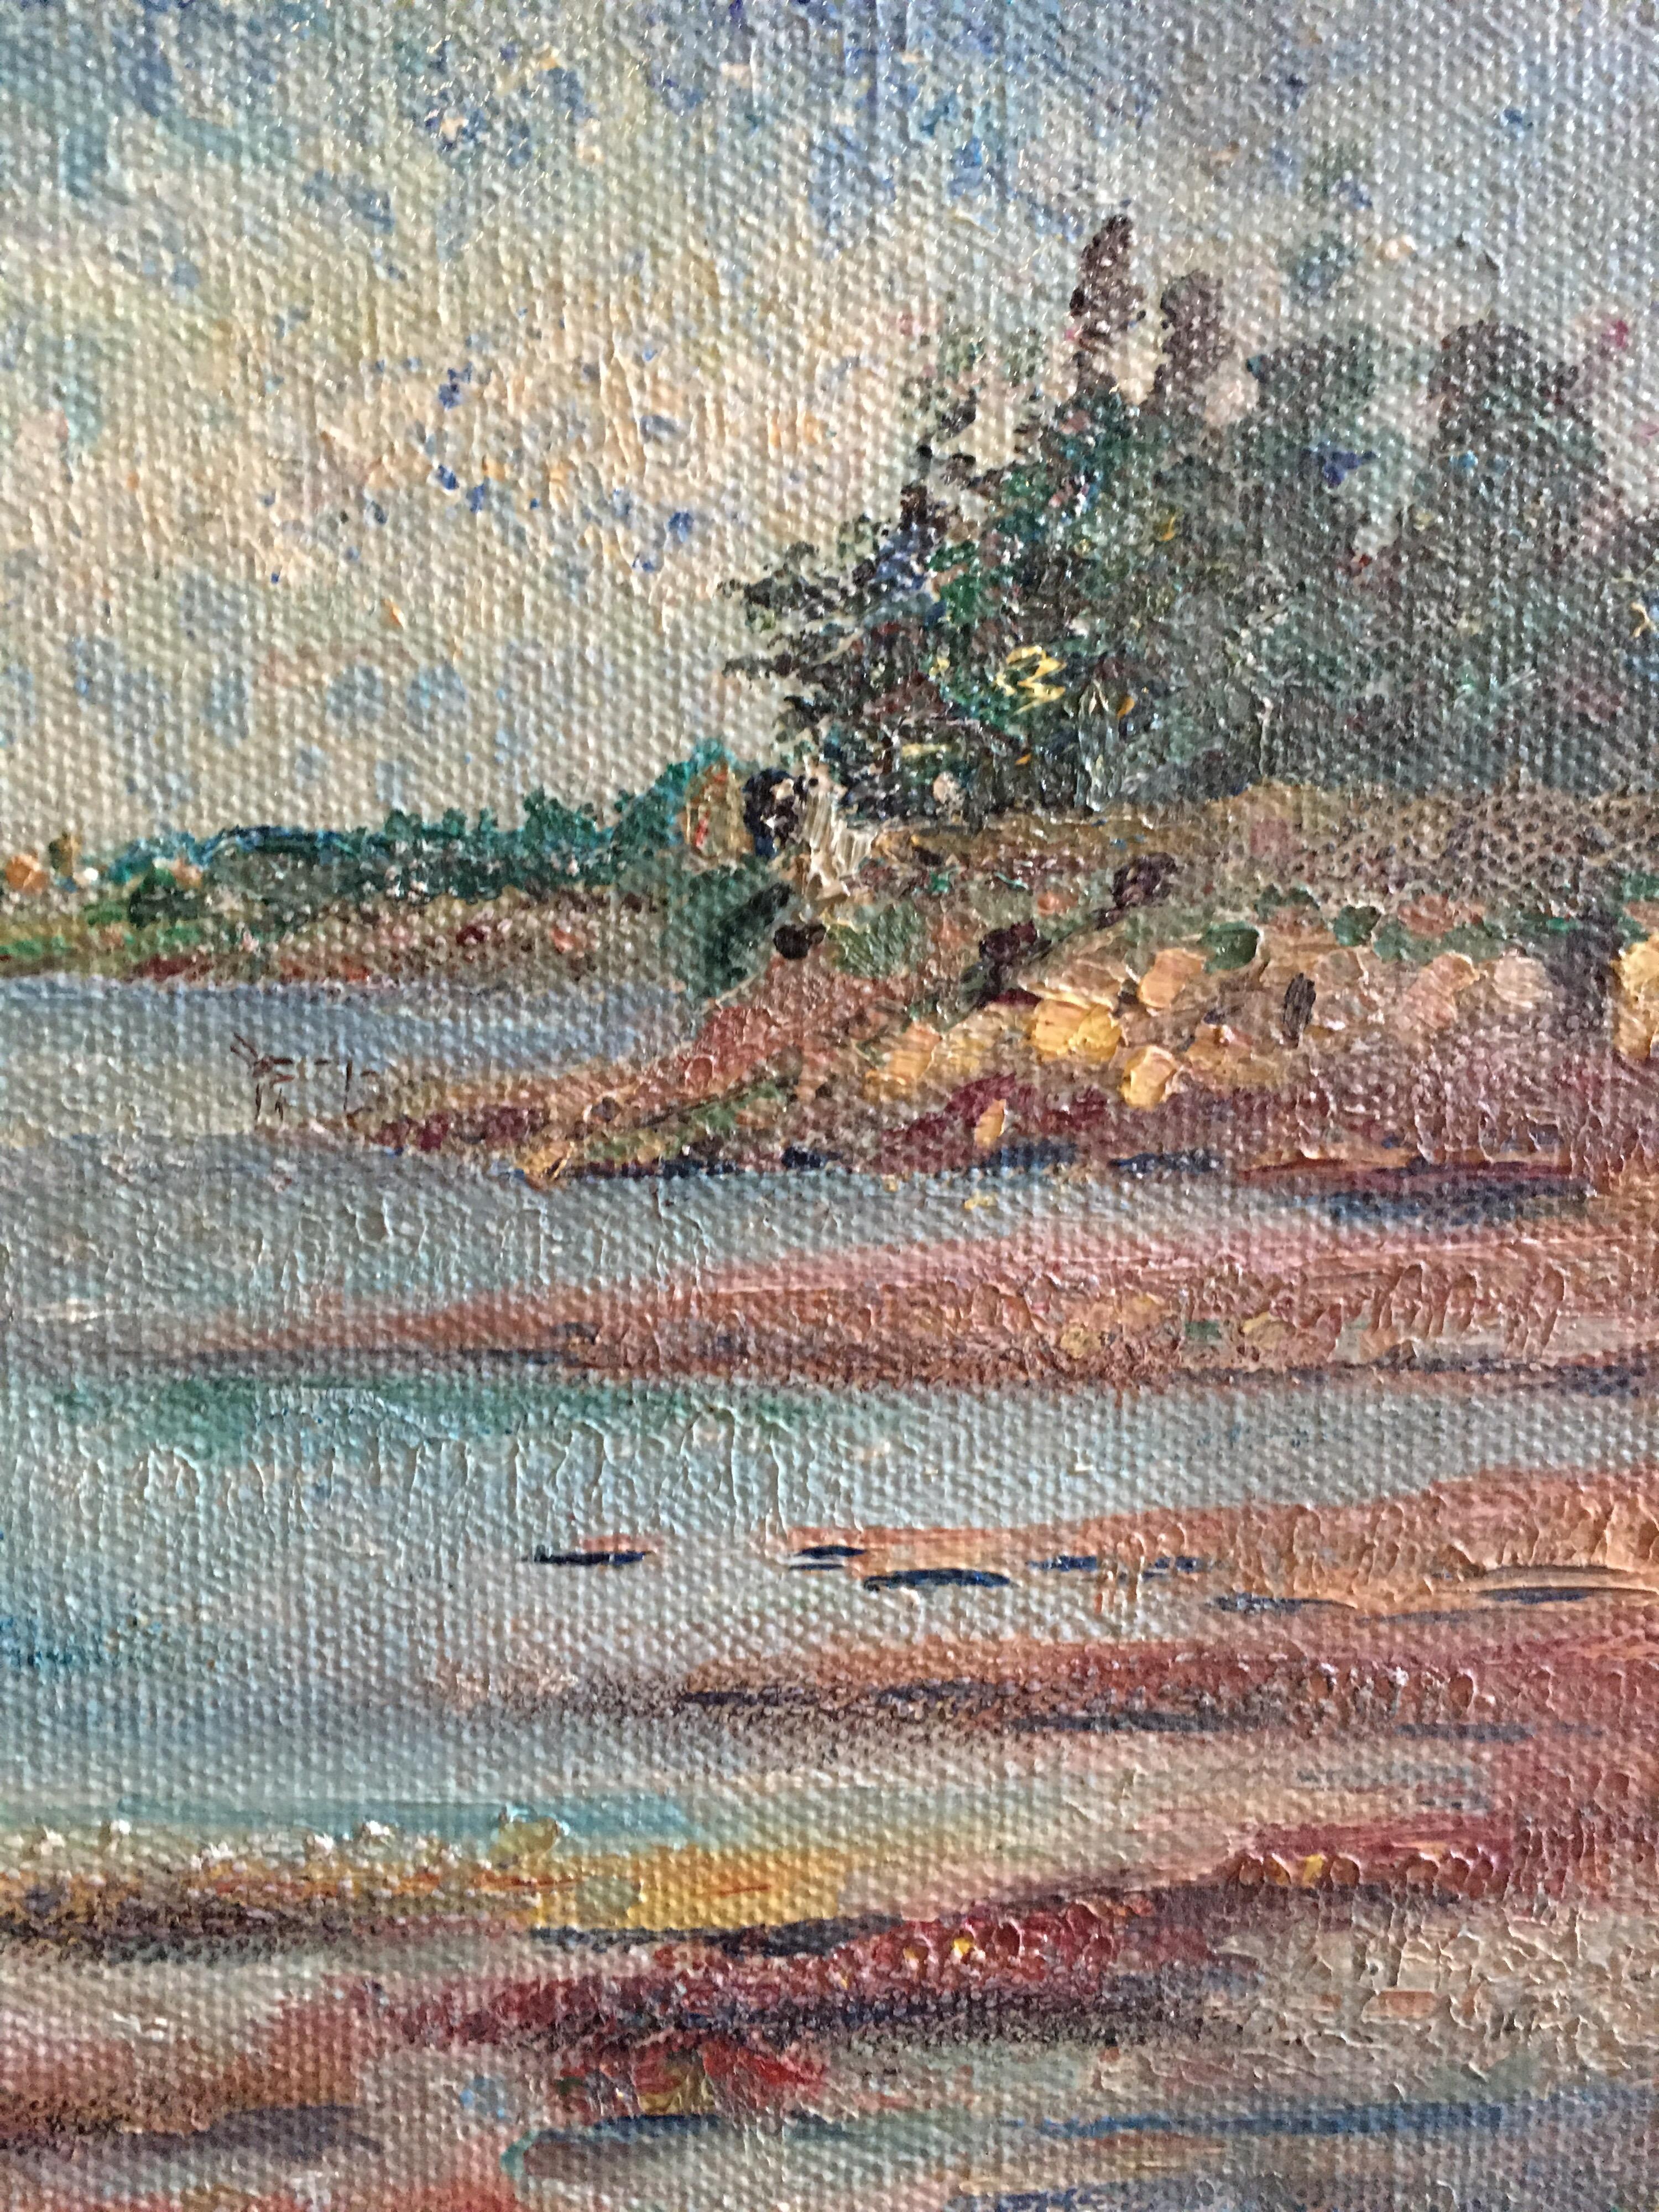 Dappled Coastal Sunset, Impressionist Landscape, Pastel Colours, Oil Painting
French School, mid 20th century
Oil painting on canvas, unframed
Canvas size: 10.5 x 18 inches

Coastal sunset landscape, showing a soft dappled light, with muted pastels.